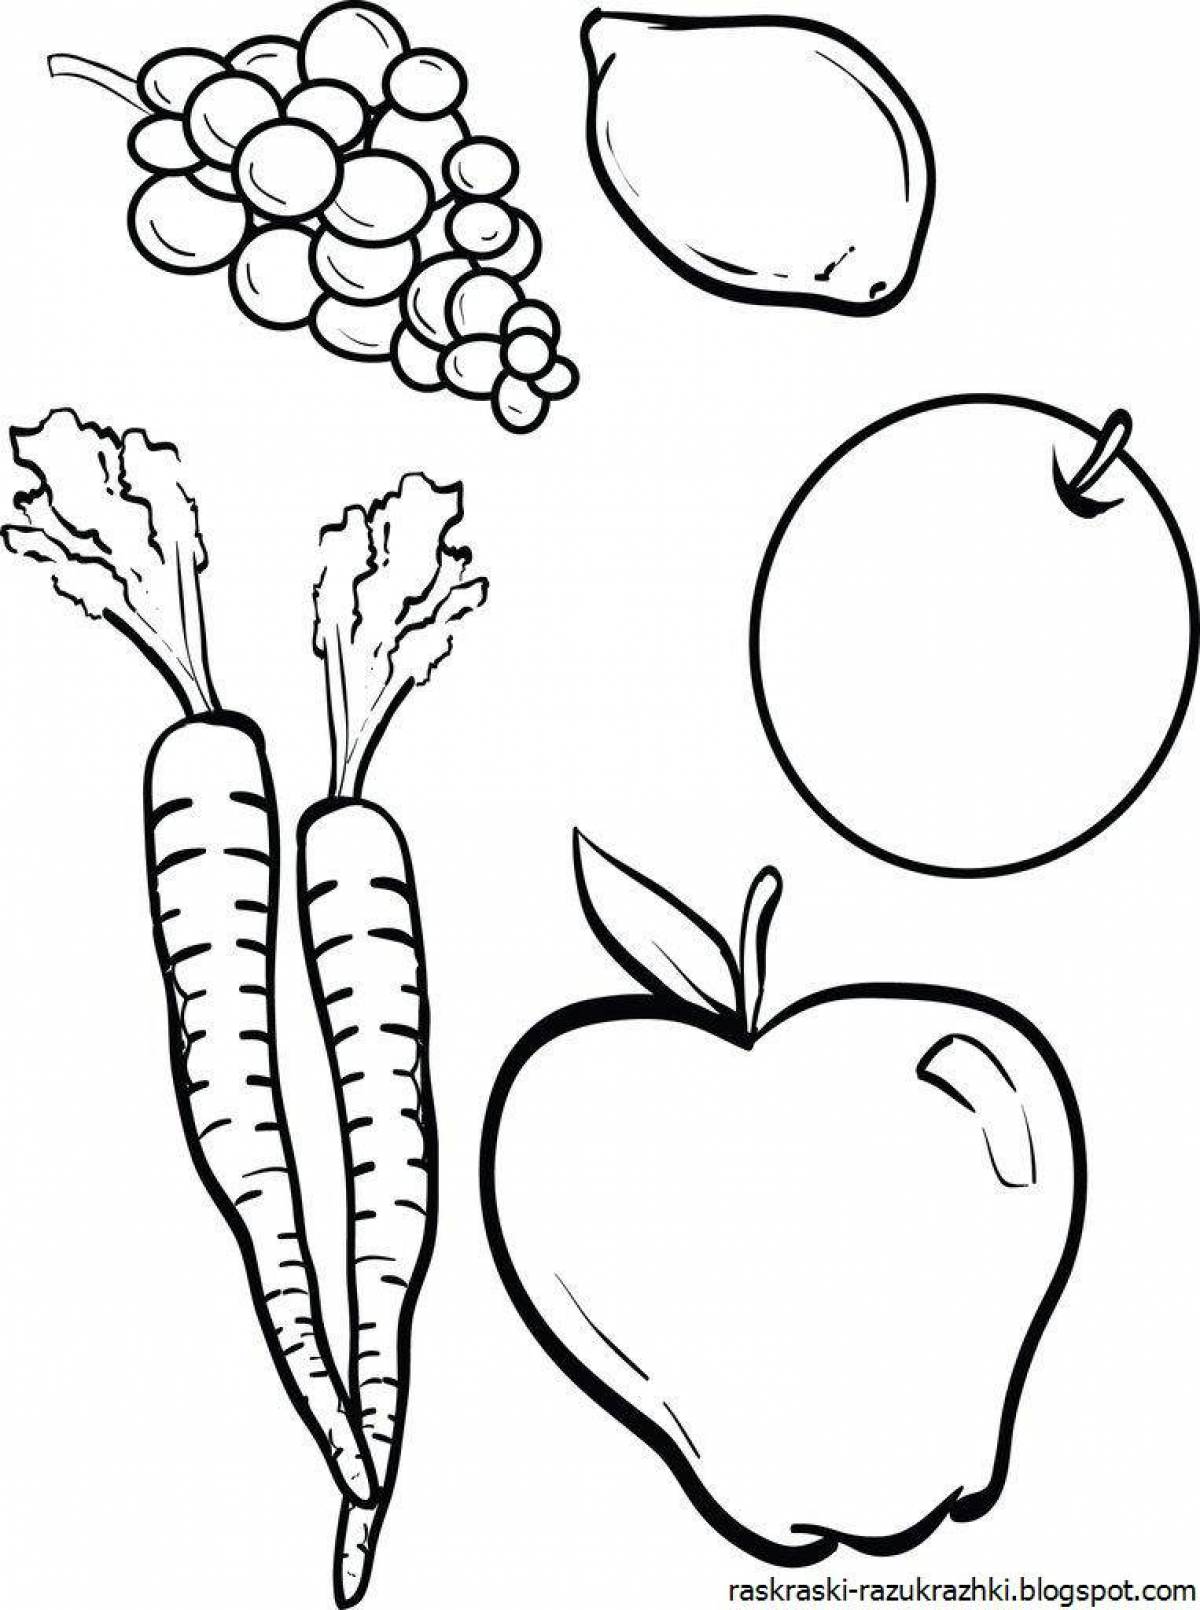 Fun coloring pages with fruits and vegetables for kids